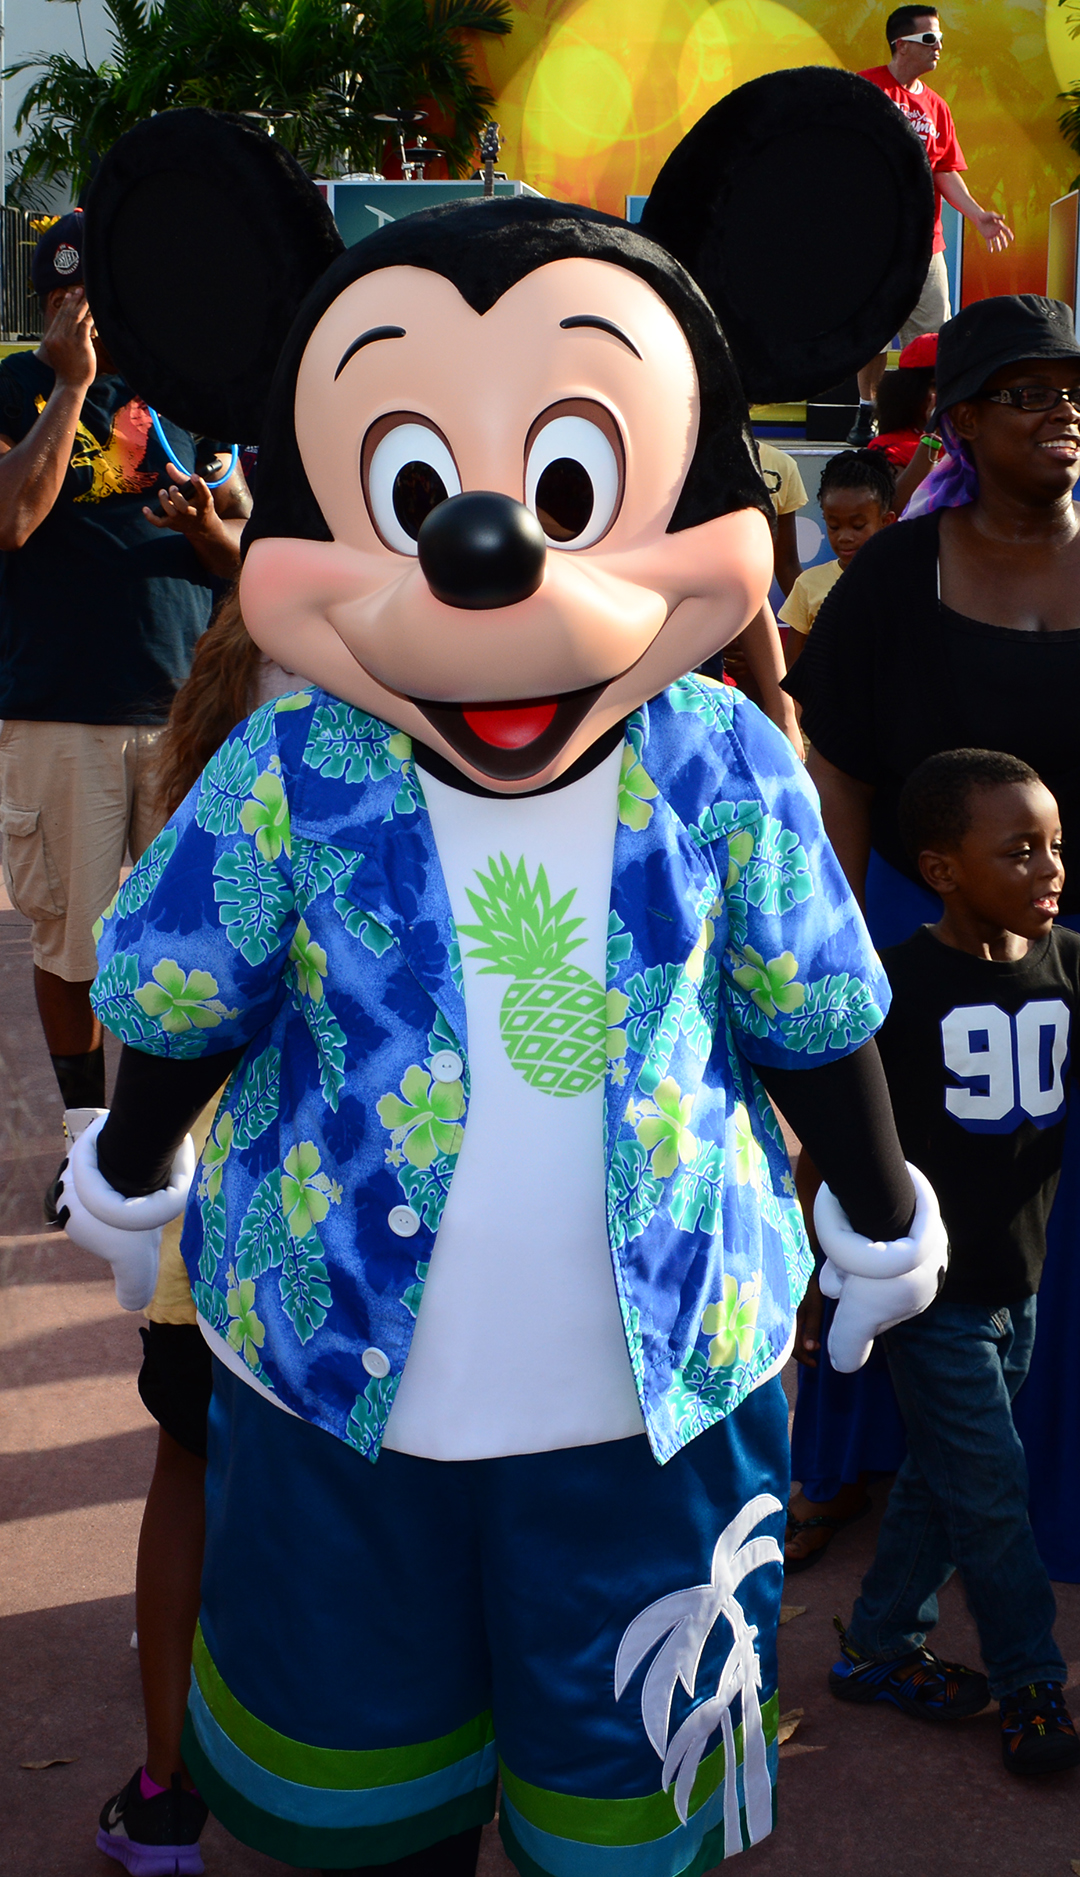 Mickey Mouse Rock your summer side dance party at Hollywood Studios June 2014